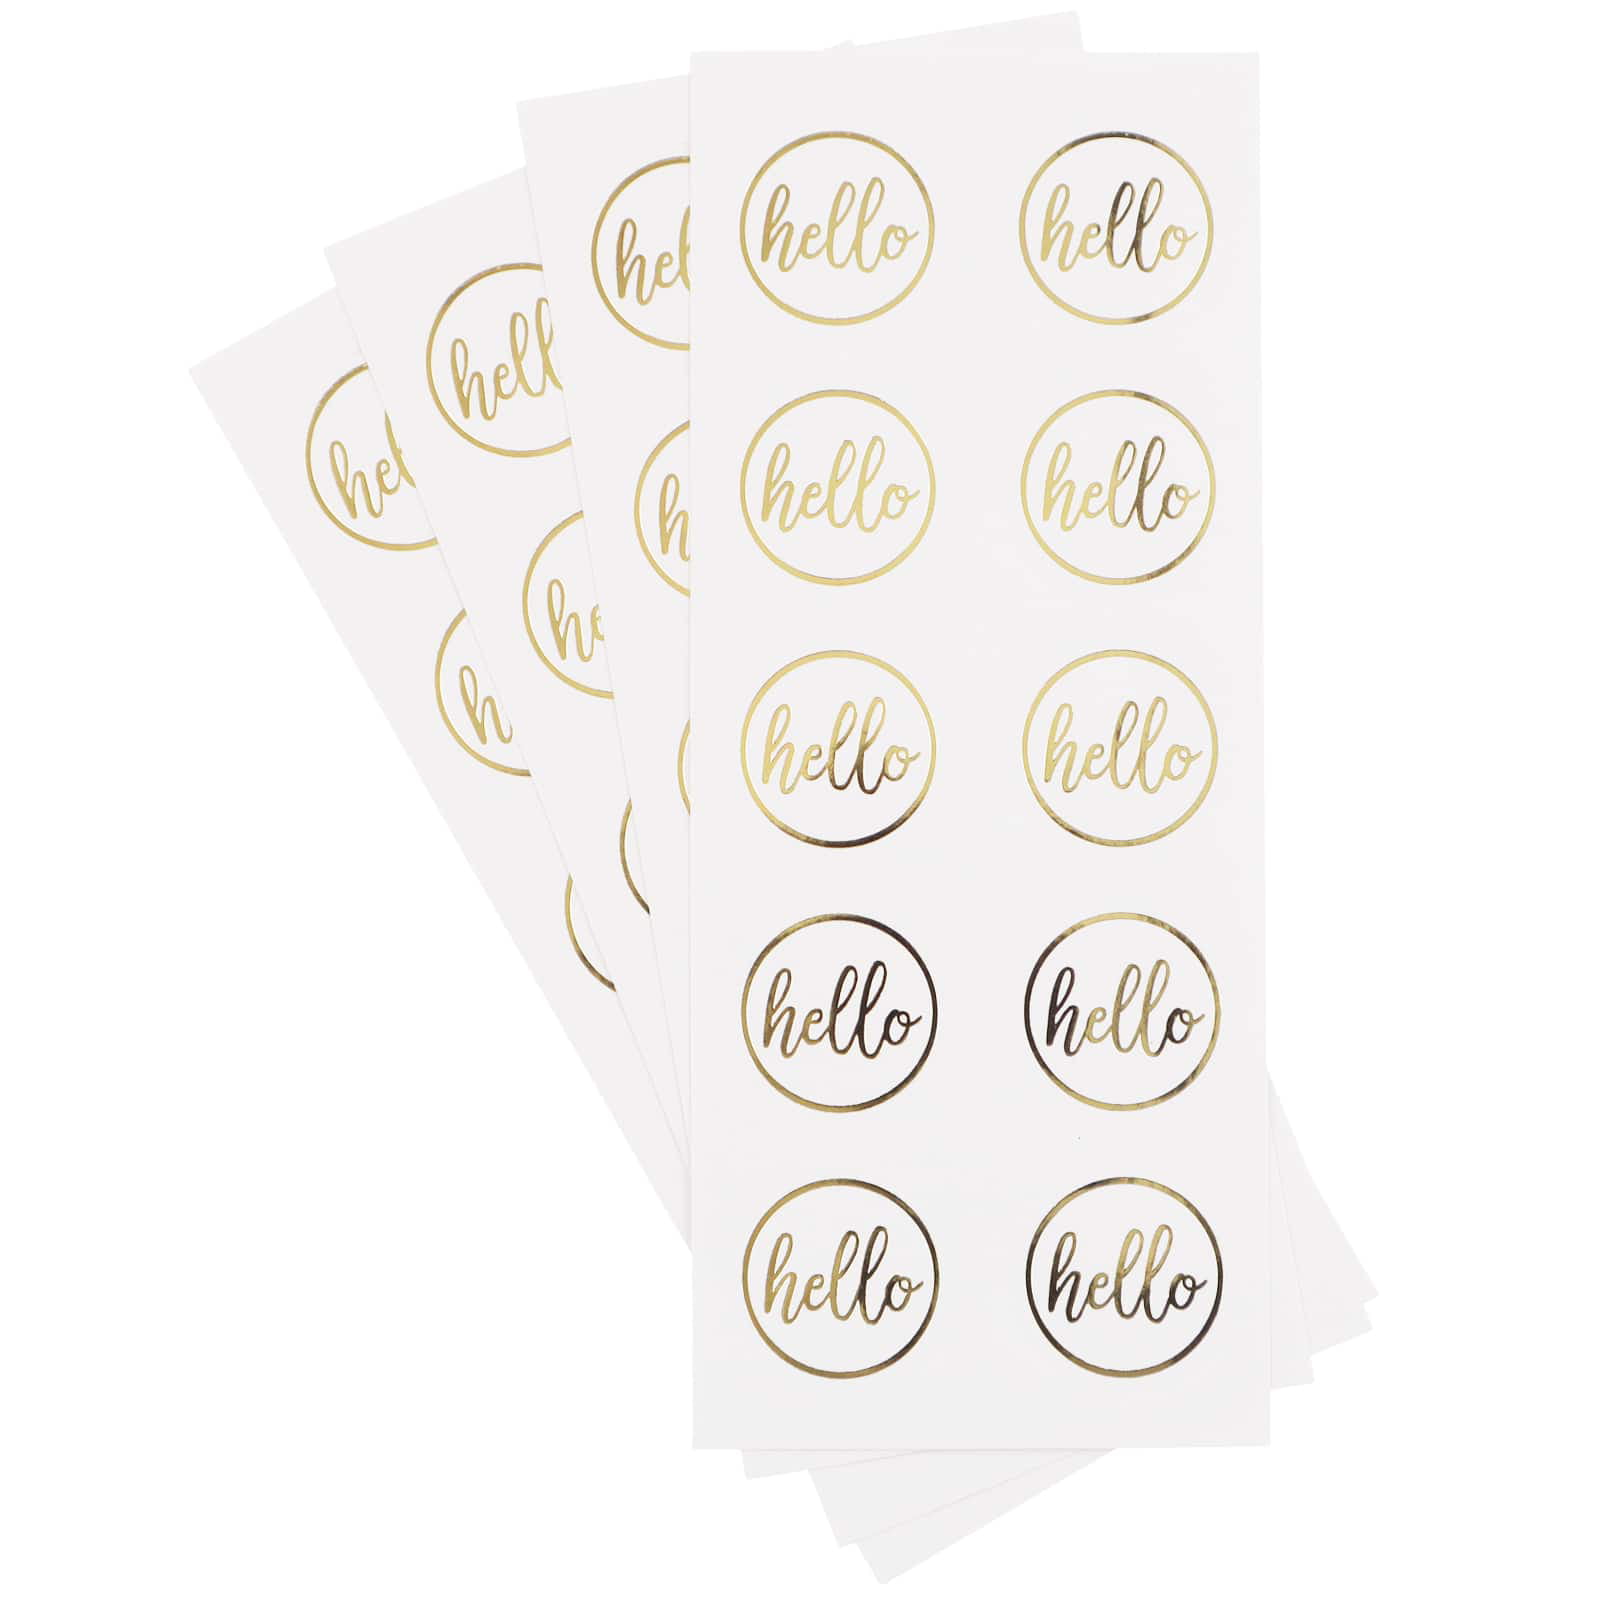 Gold Envelope Seals by Recollections™